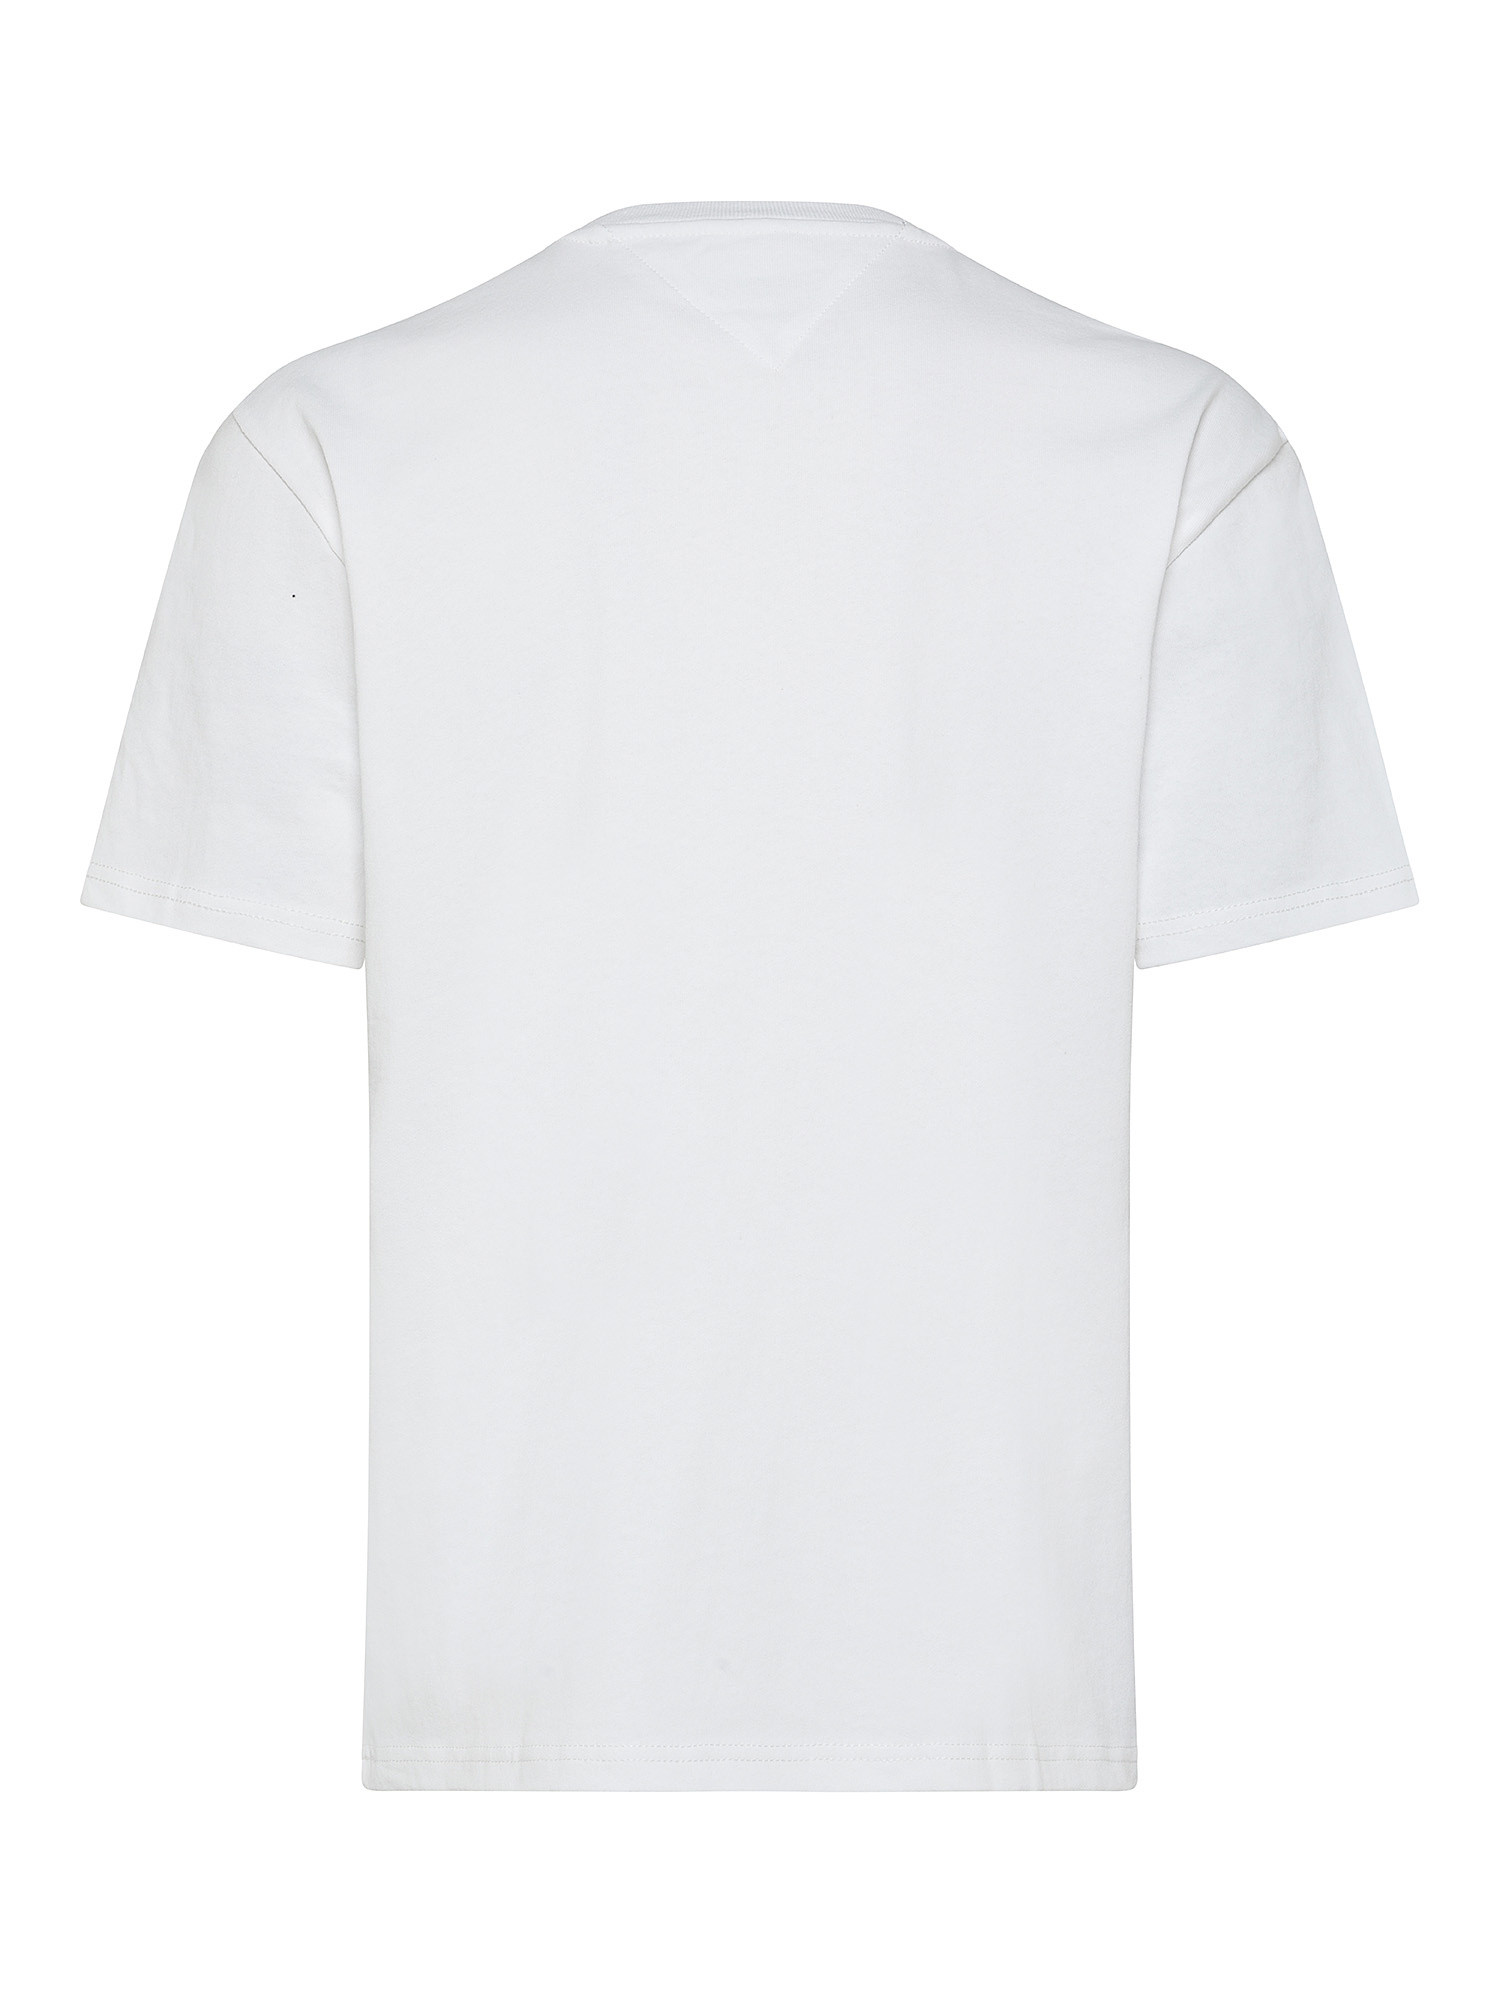 Tommy Jeans - Cotton crewneck T-shirt with micrologo, White, large image number 1